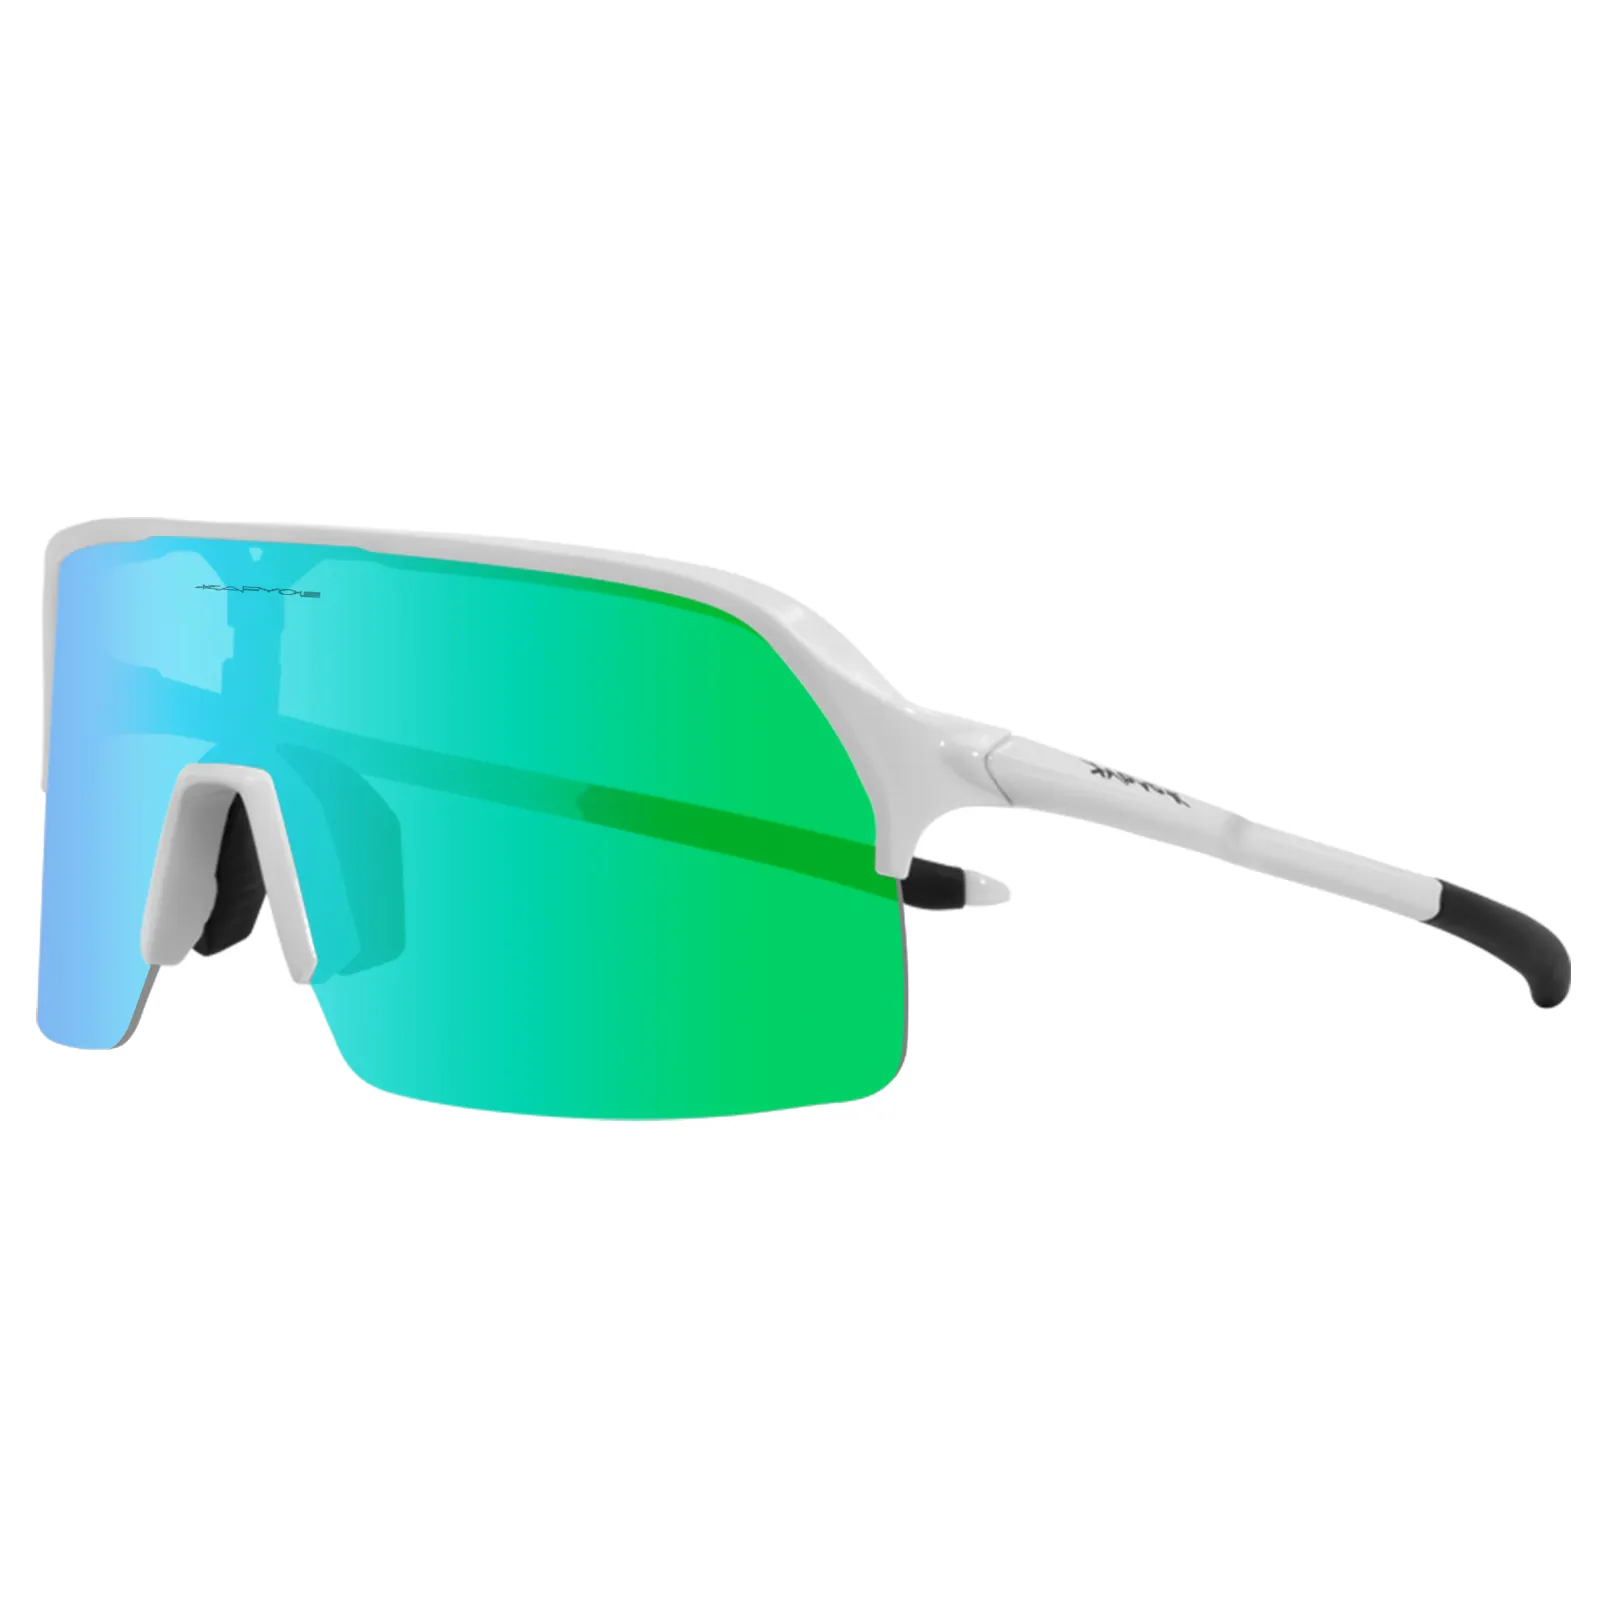 Polarized Outdoor Sports Cycling Sunglasses Road Mountain Bike Bike Motorcycle Glasses Cycling Sunglasses